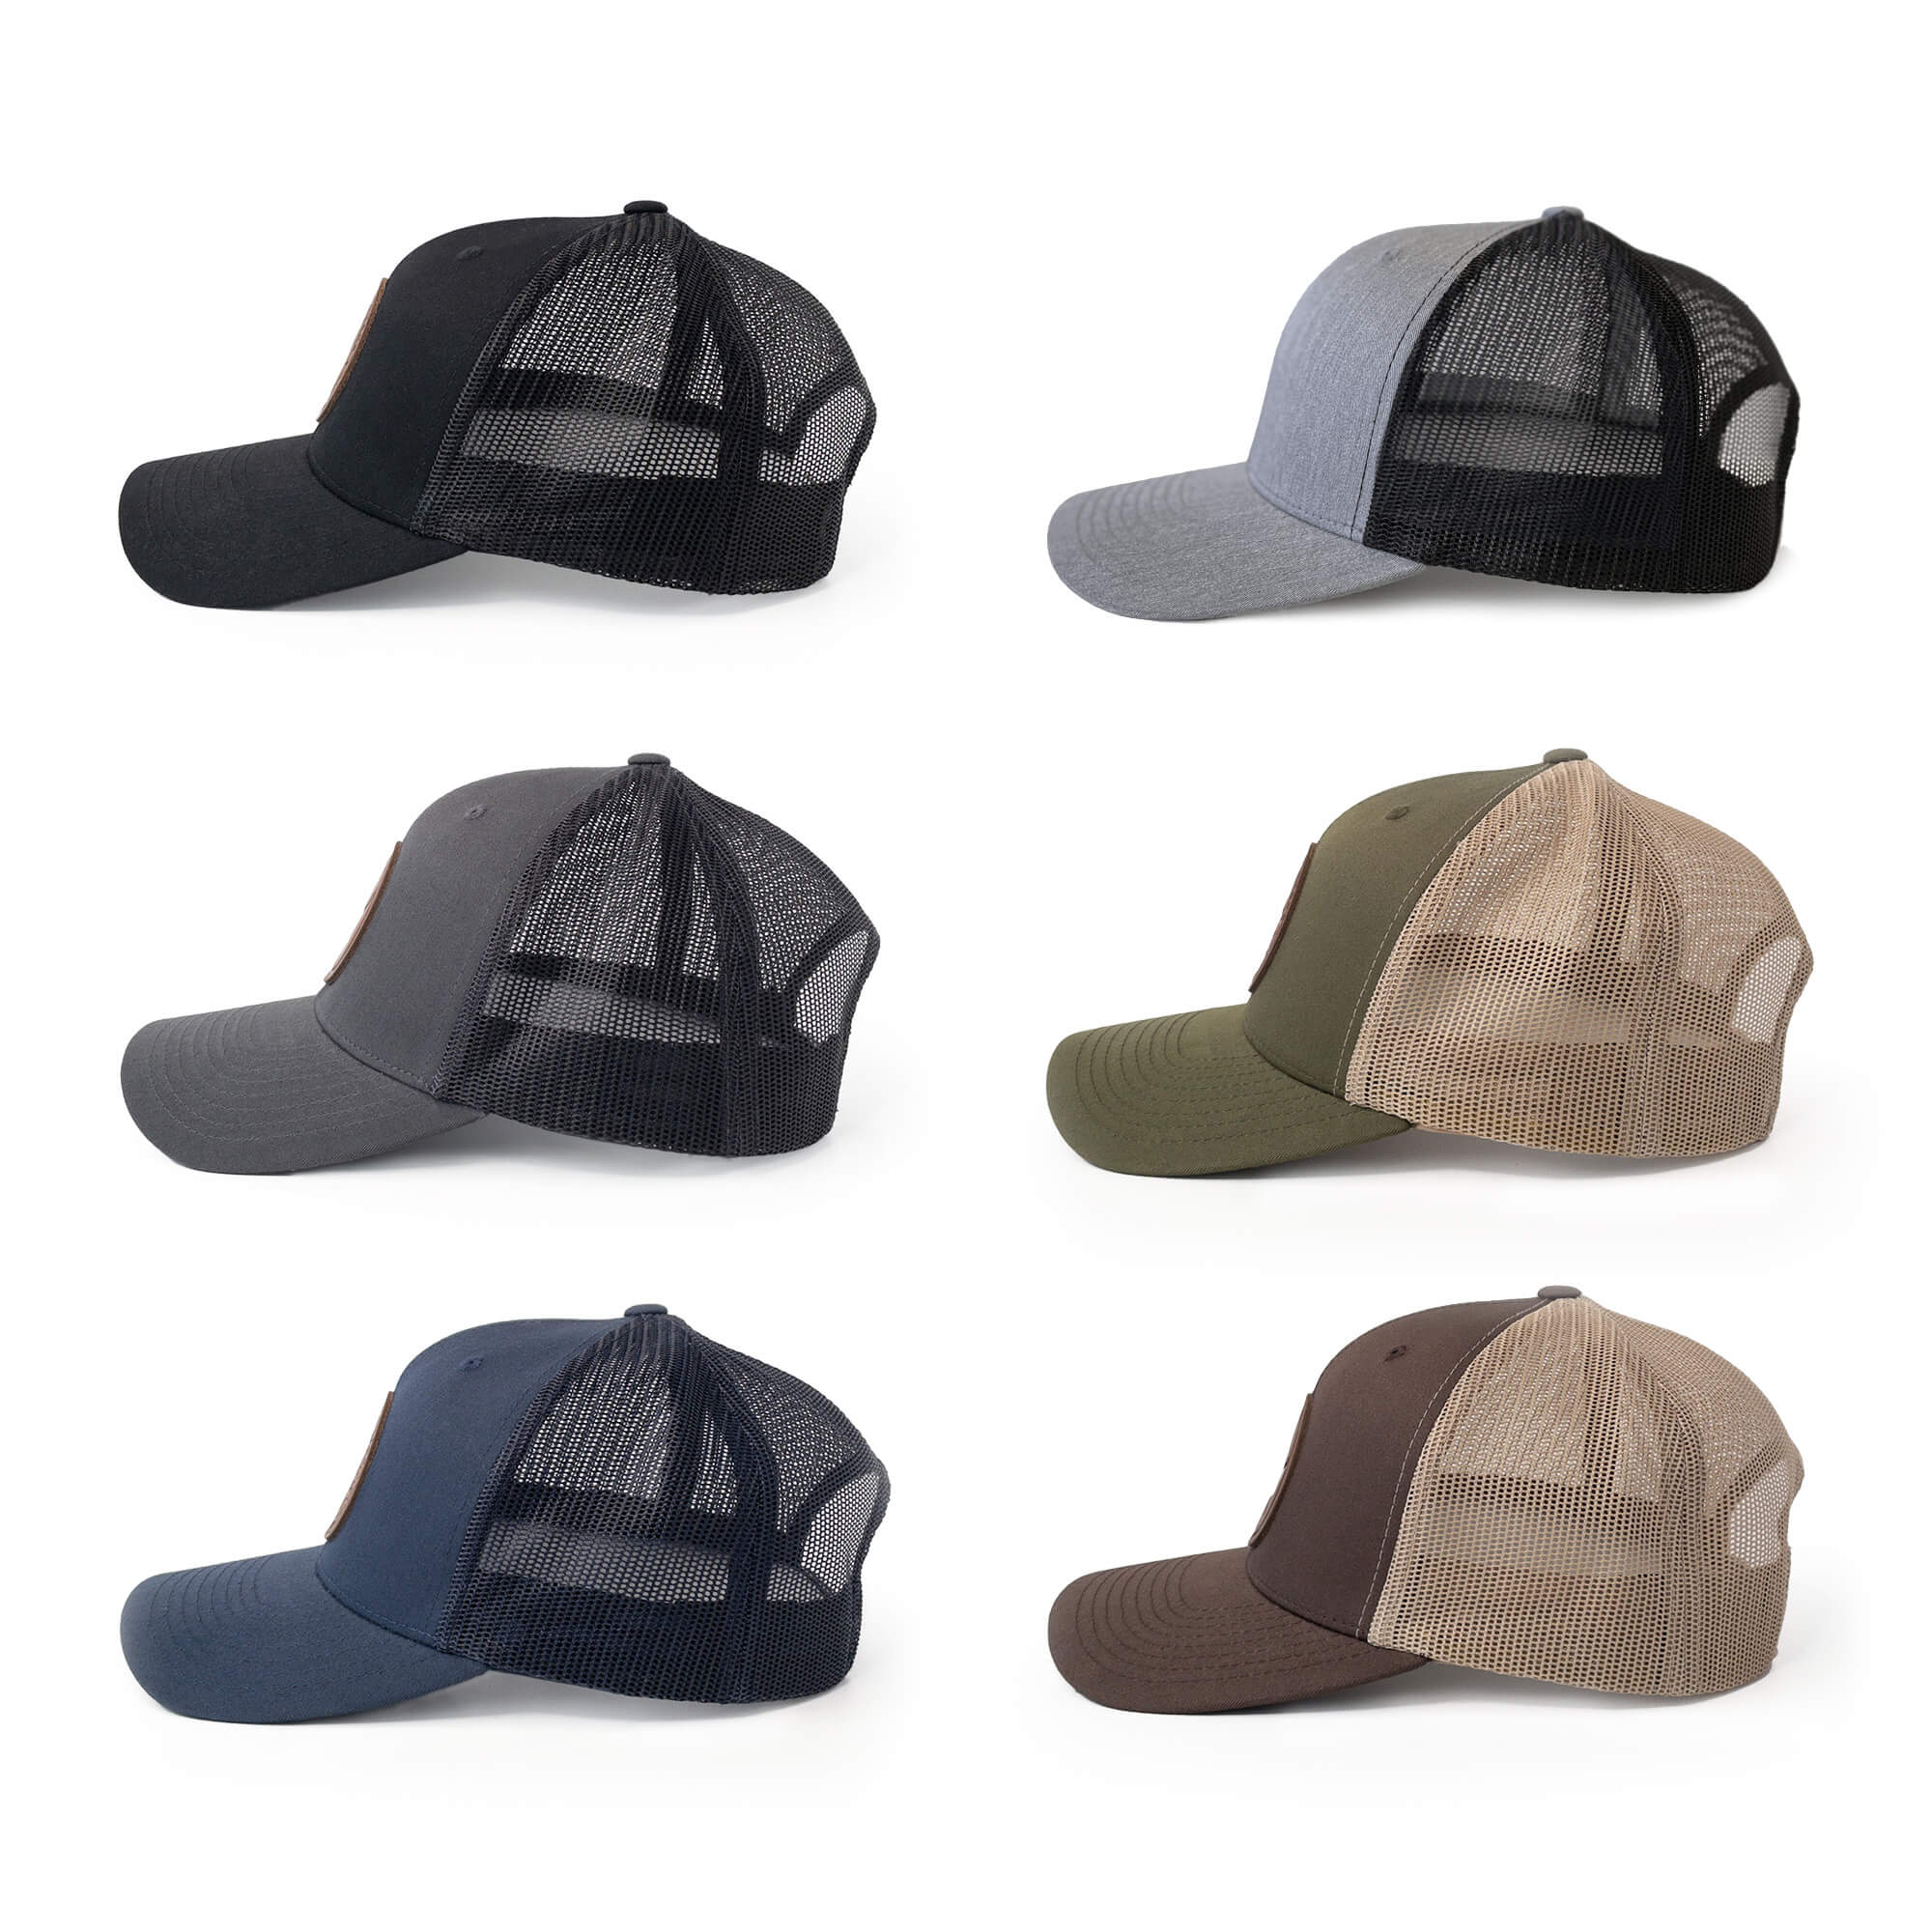 Leather patch trucker hats available in 6 colors | BLACK-002-008, CHARC-002-008, NAVY-002-008, HGREY-002-008, MOSS-002-008, BROWN-002-008